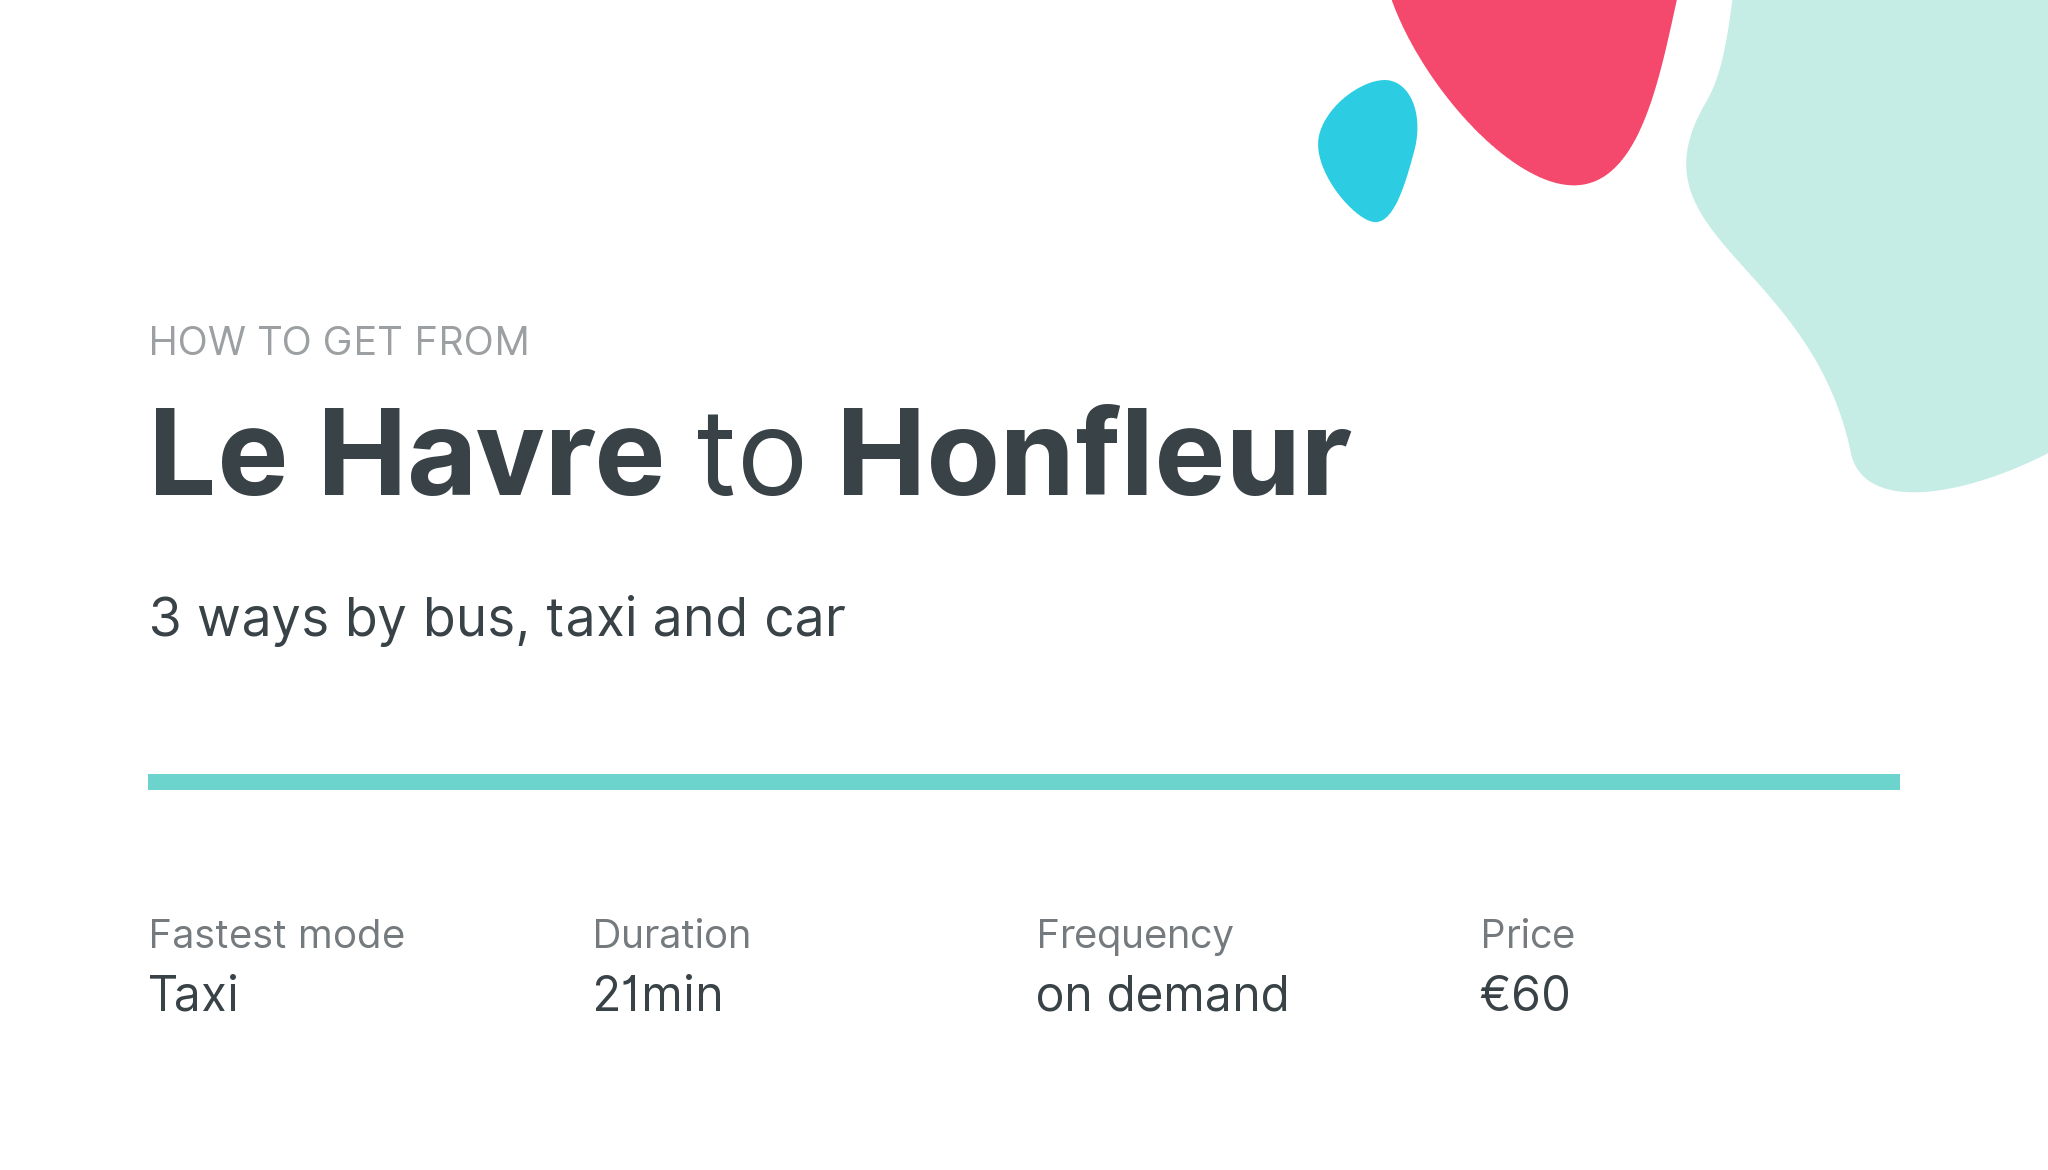 How do I get from Le Havre to Honfleur